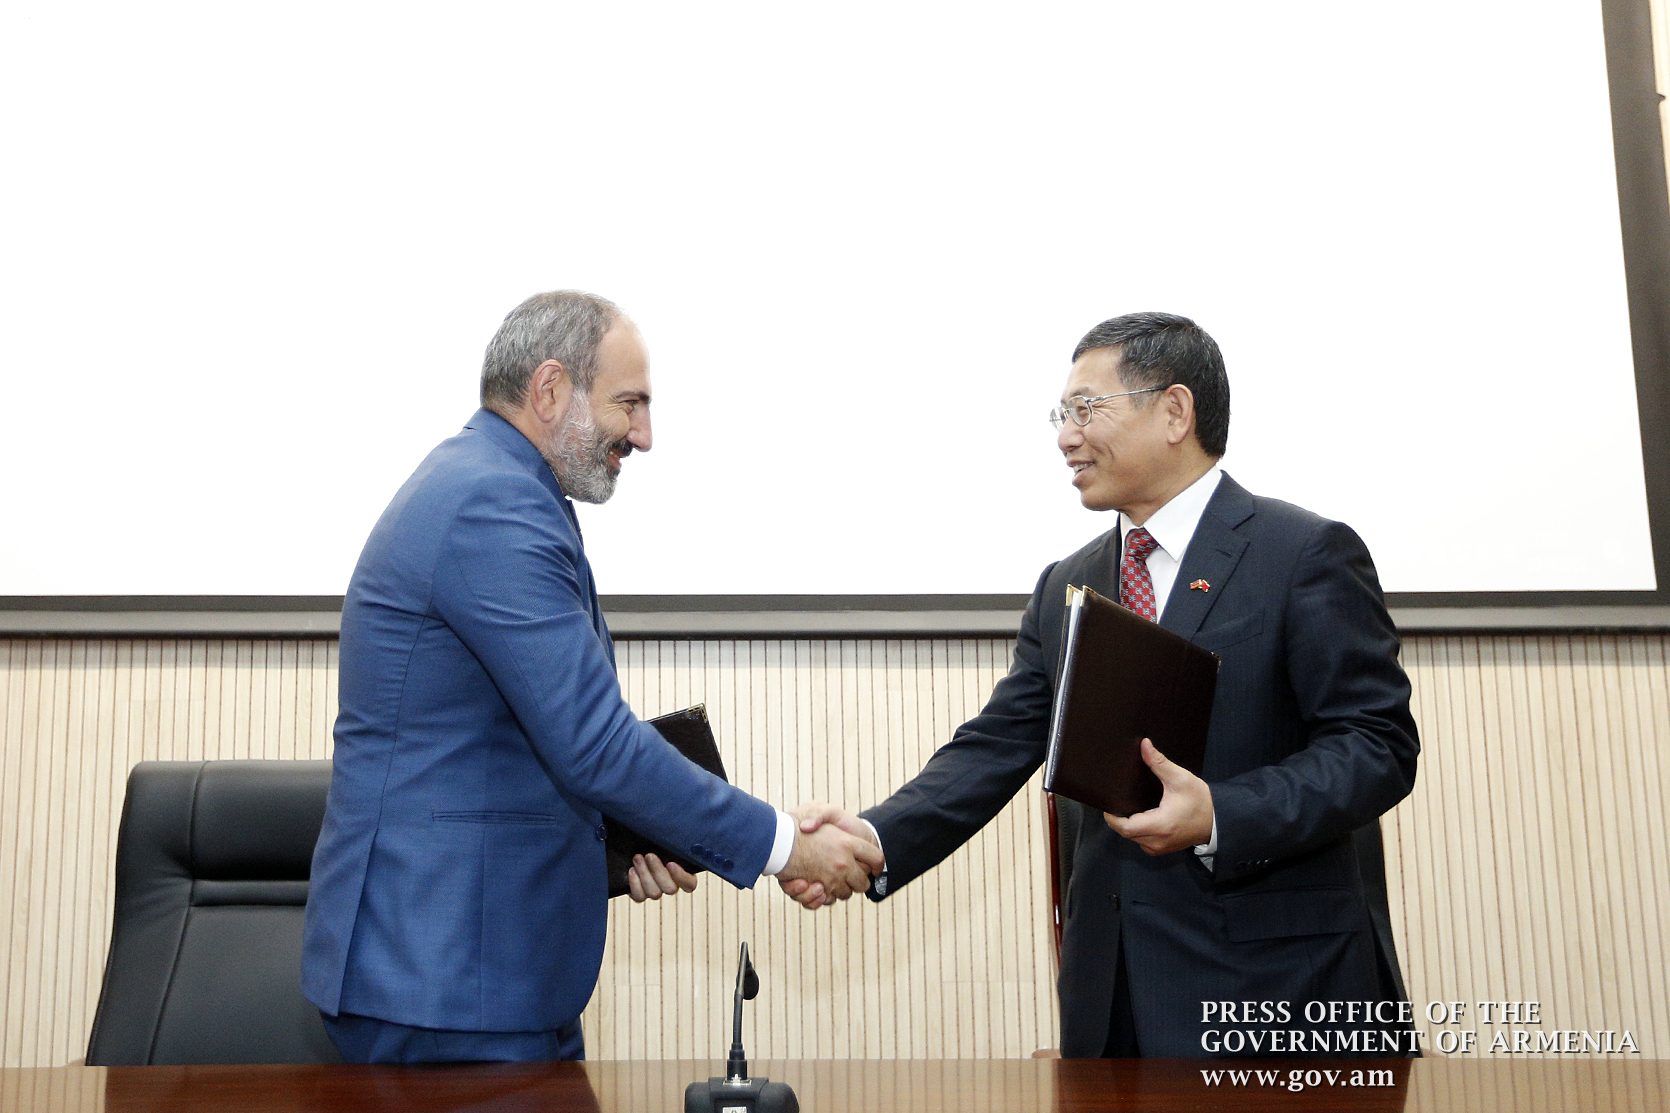 Nikol Pashinyan: ‘The launch of the Armenian-Chinese Friendship School should symbolize the opening of a new chapter of friendship, more effective and closer cooperation in our relations’